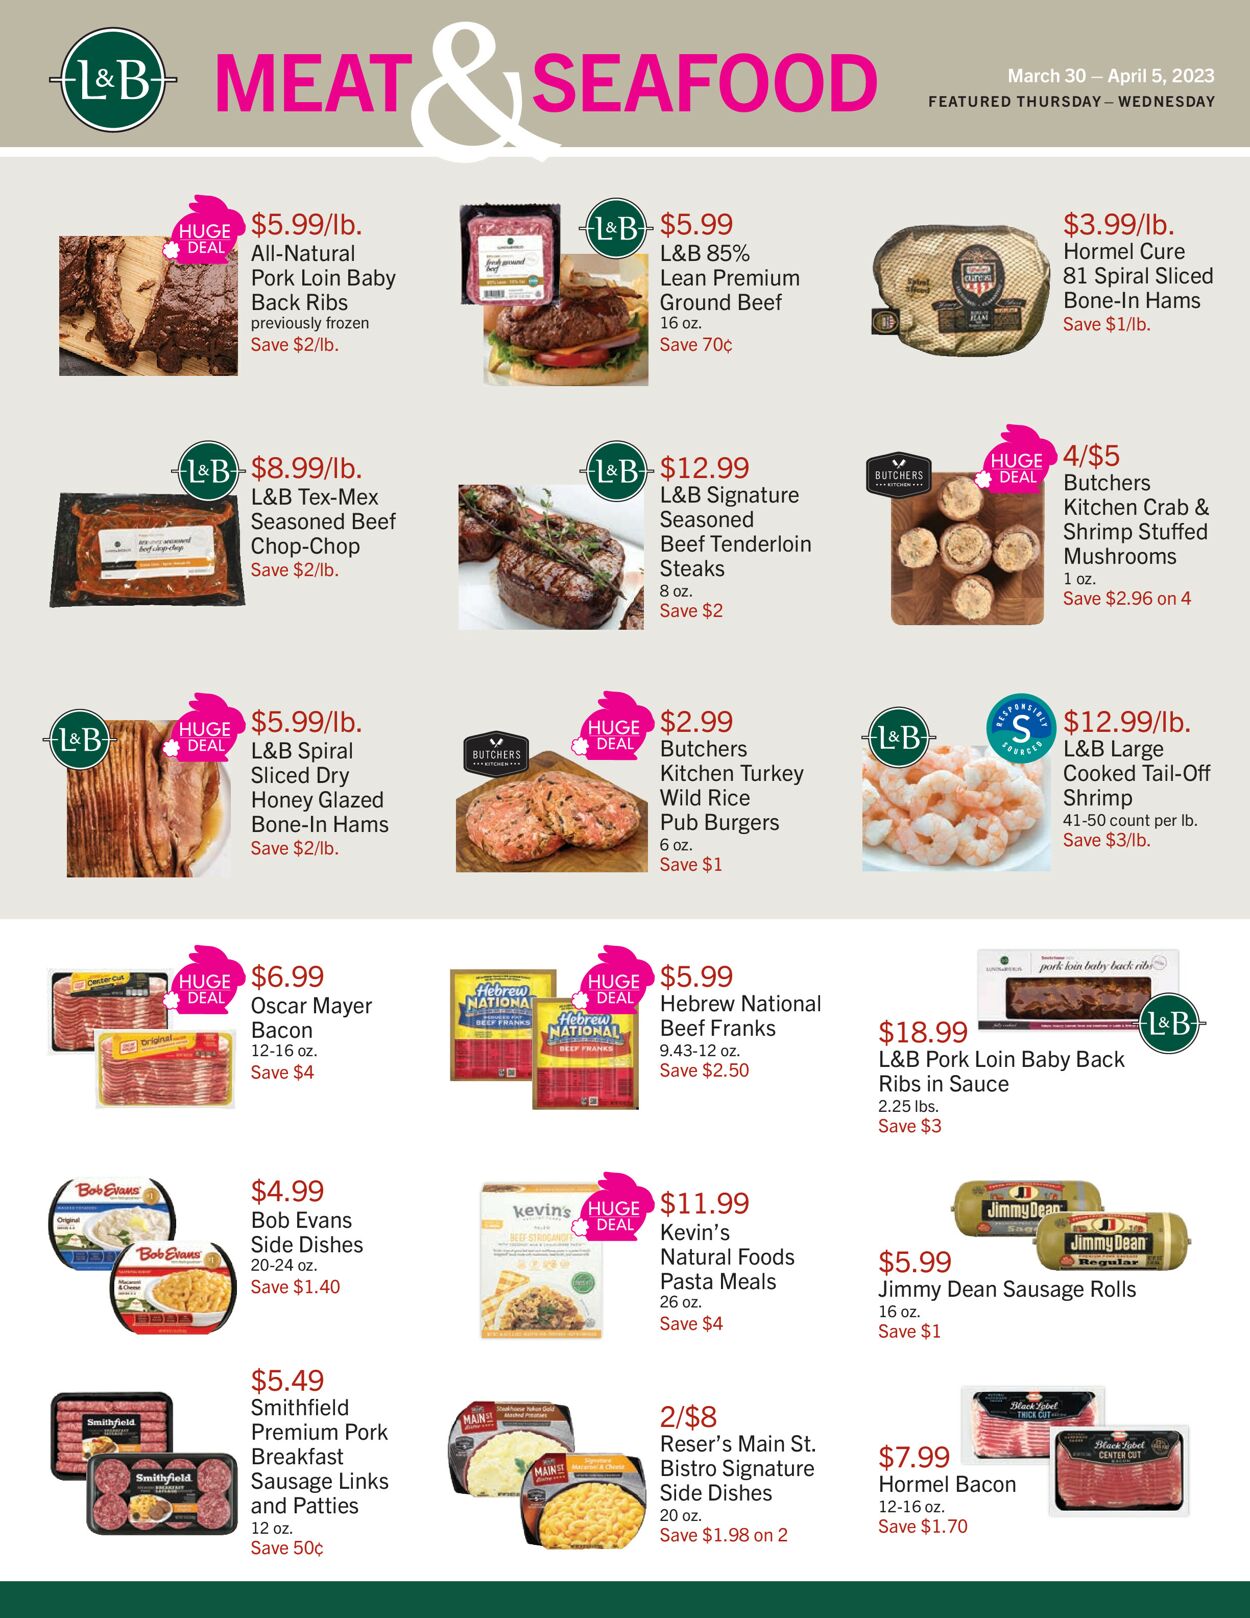 Lunds & Byerlys Ad from 03/30/2023